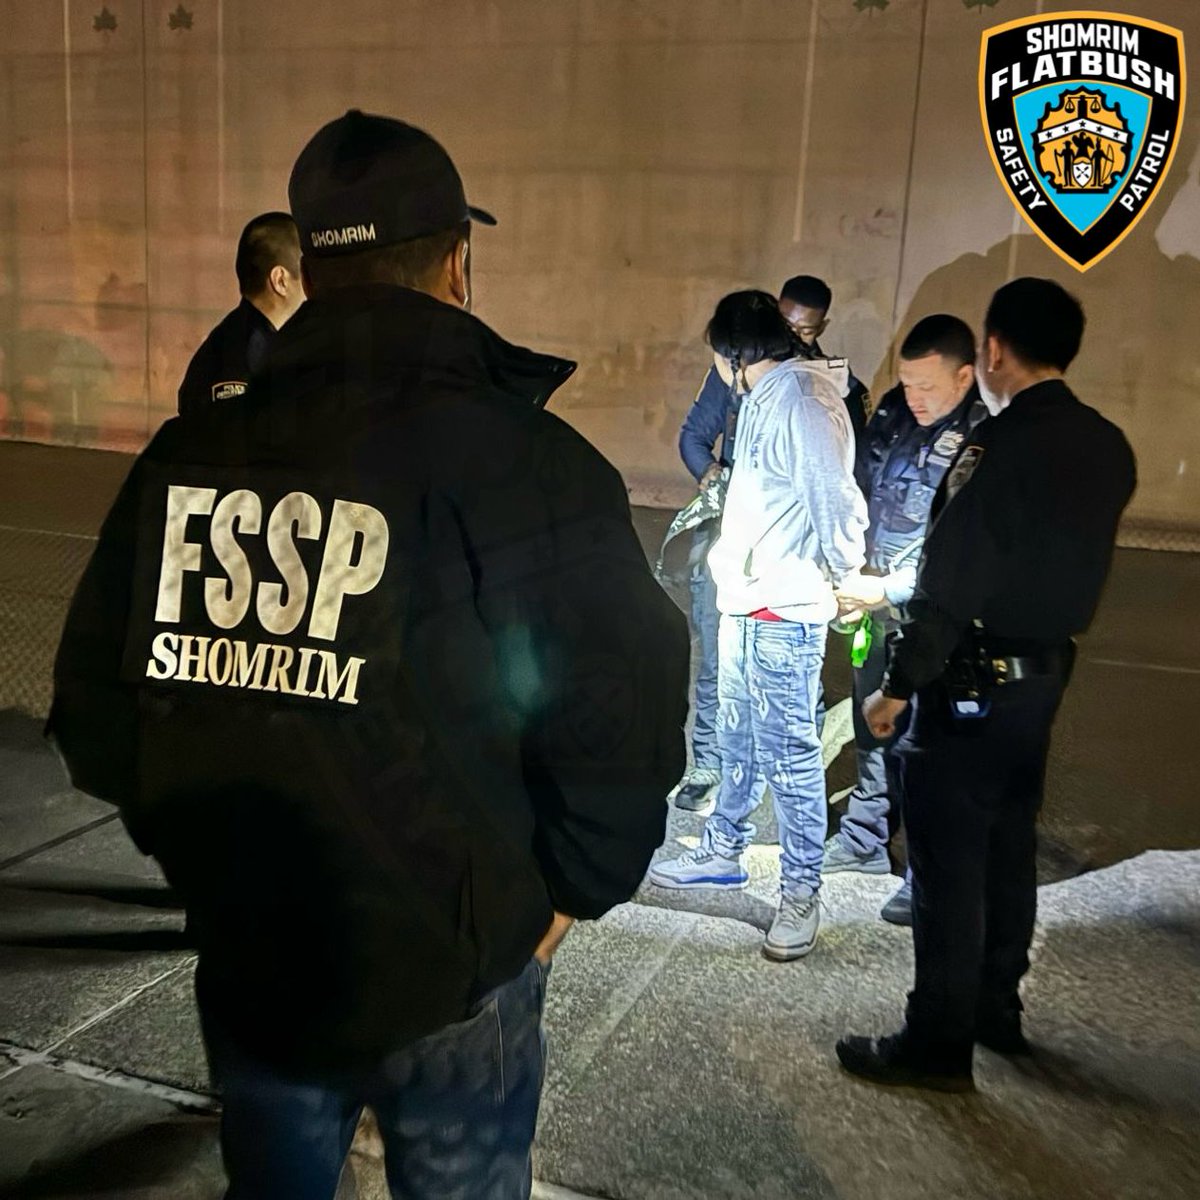 Our volunteers responded to a call for a vicious assault on Avenue S. After obtaining a clear description and video of the incident, our volunteers started a canvass and ultimately picked up 1 of the perps, leading to his arrest by @NYPD61Pct for felony assault. #SaferStreets